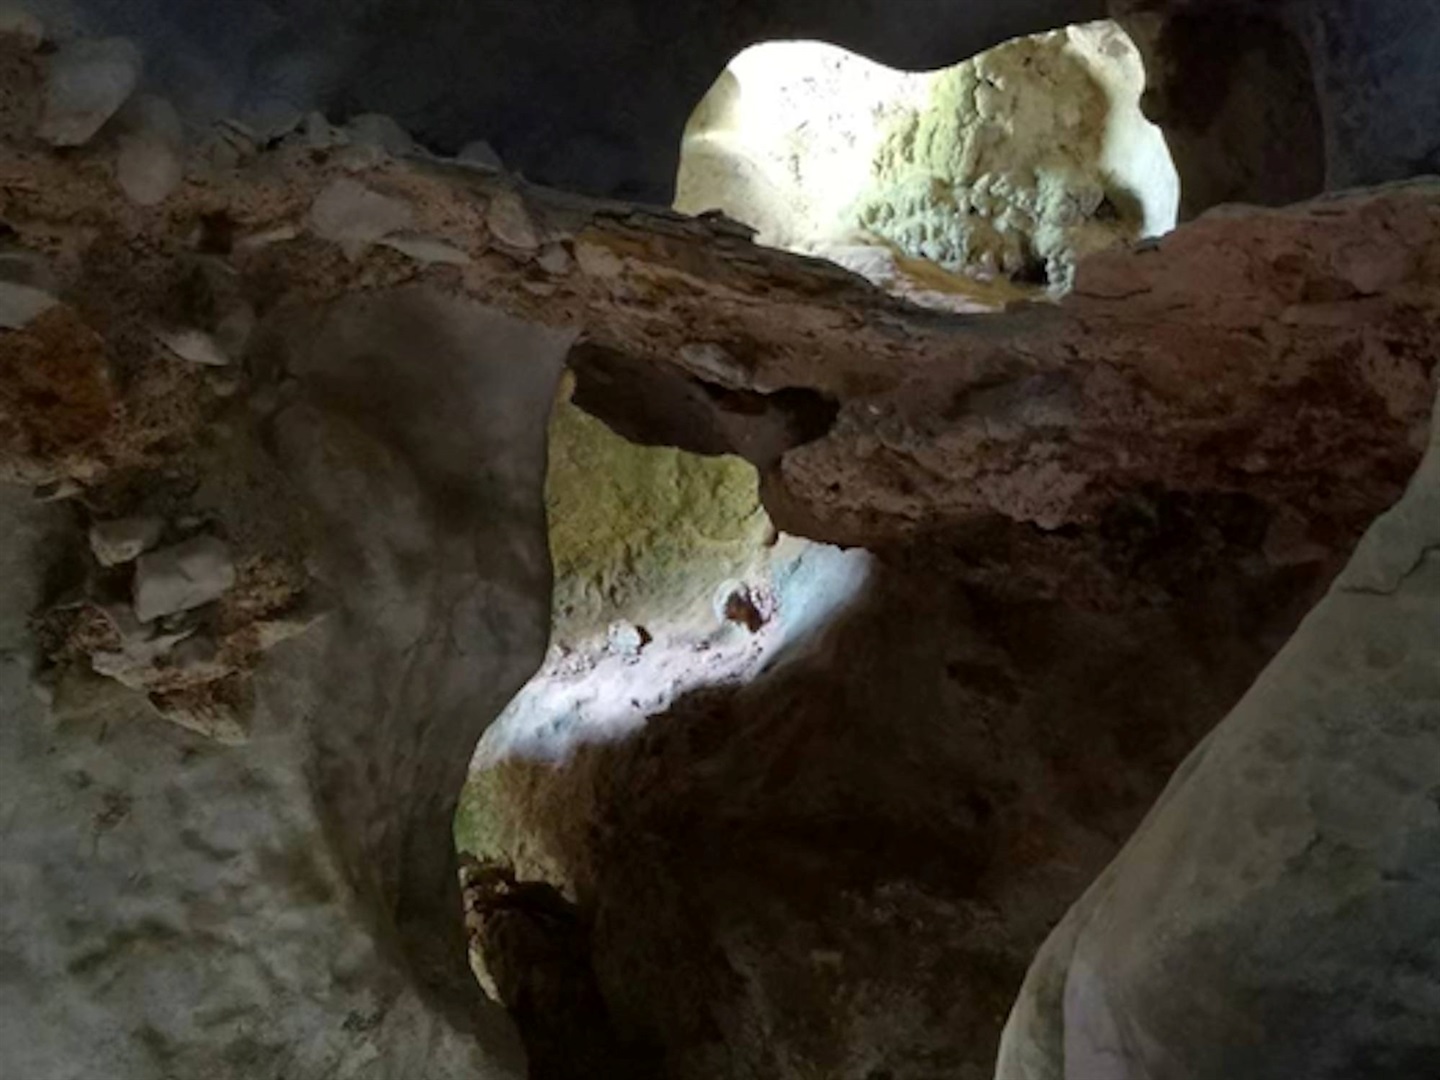 The inside of the cave is shown here.